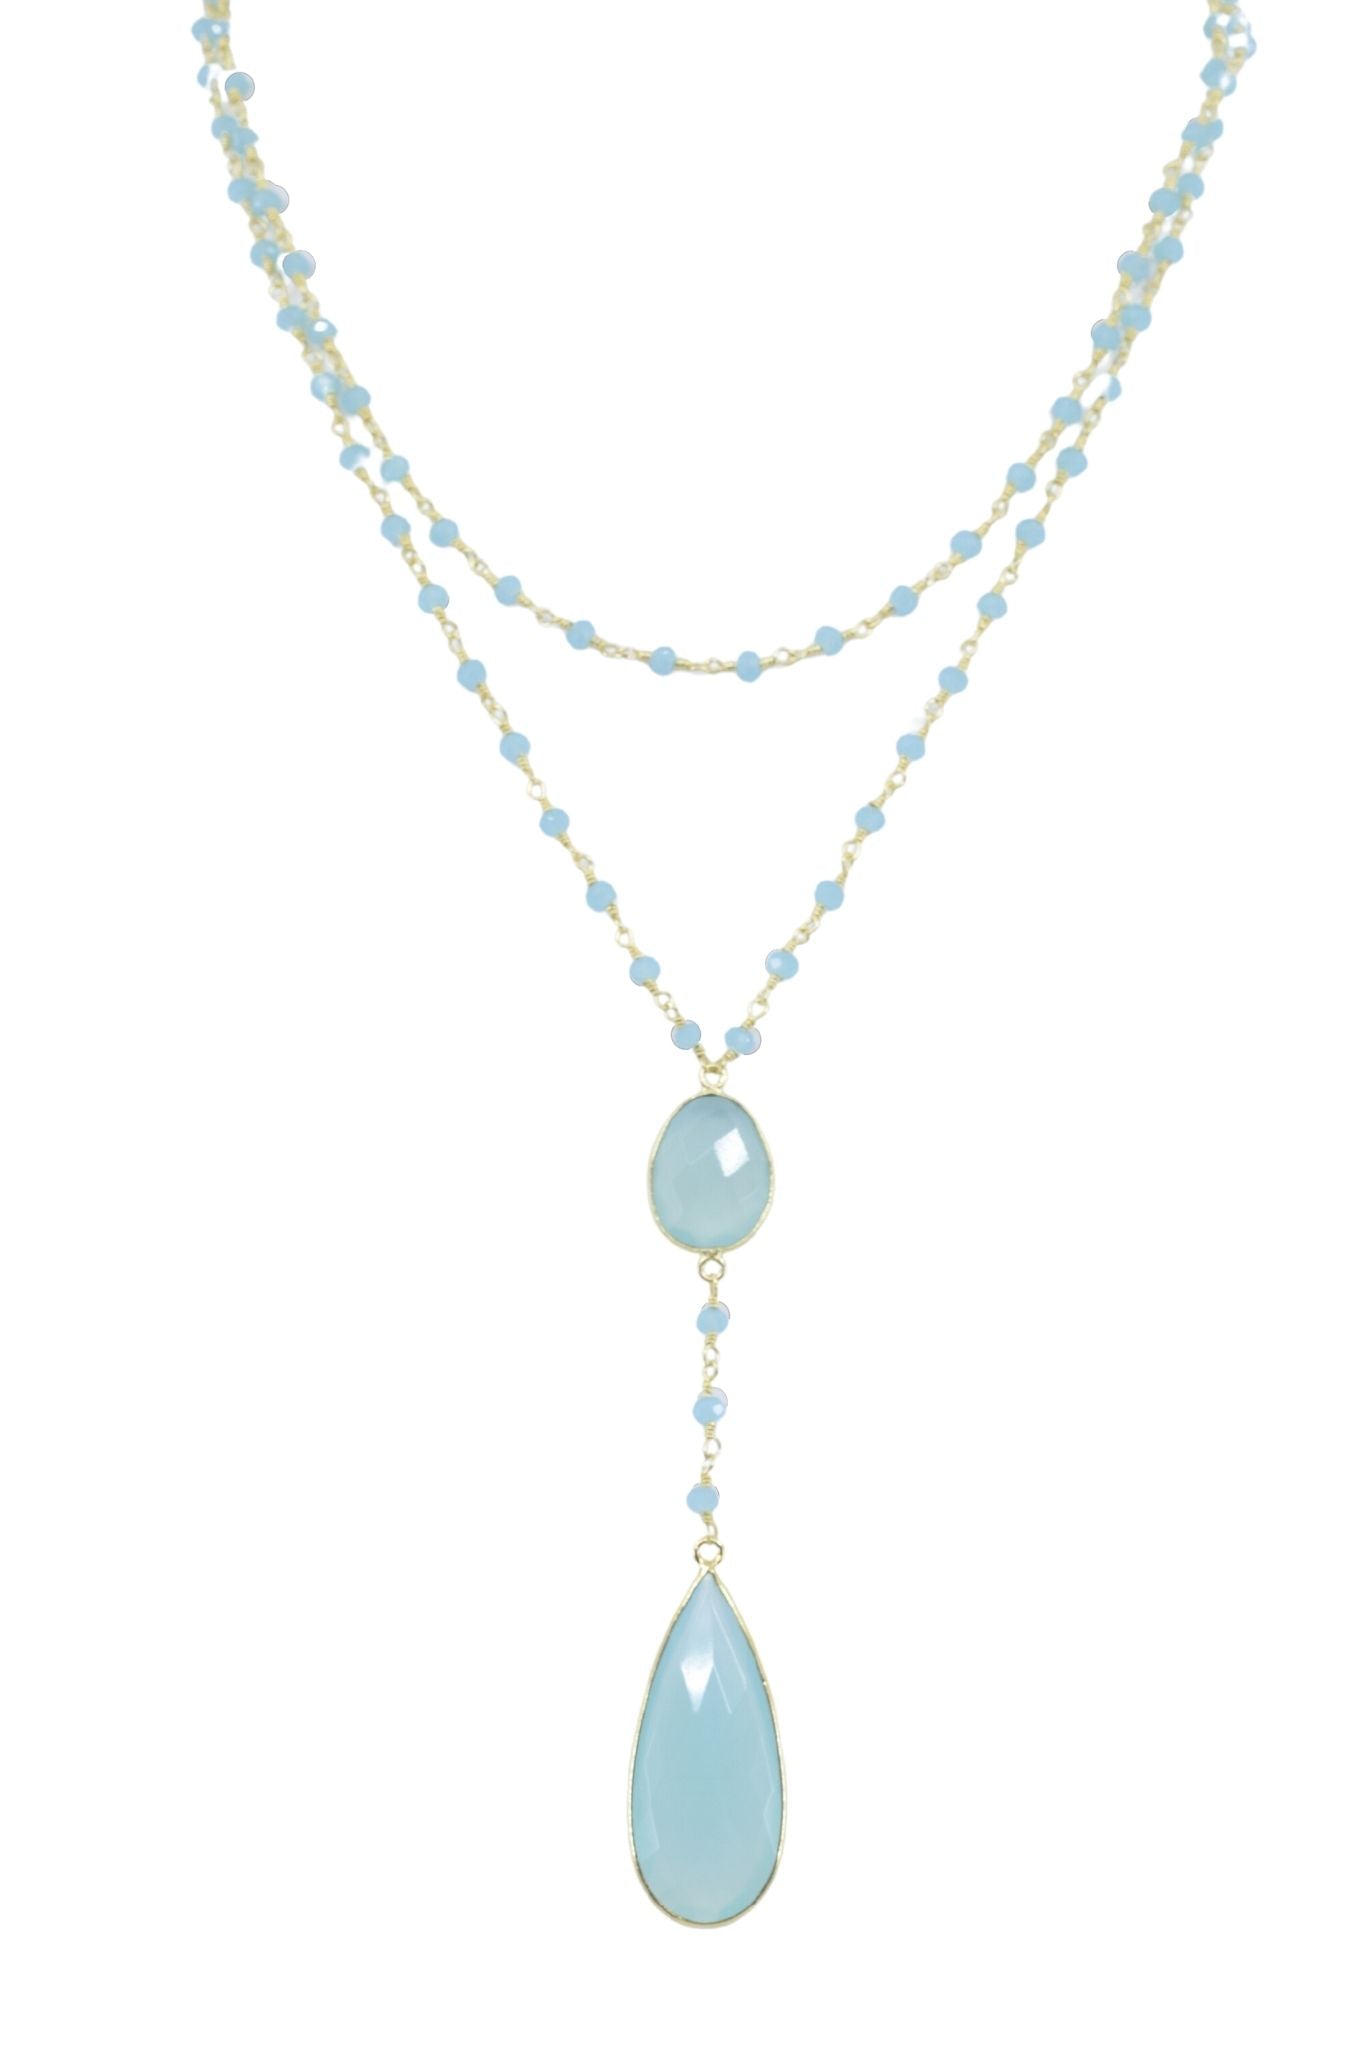 Double Diana Denmark Necklace in Chalcedony with Chalcedony Drop